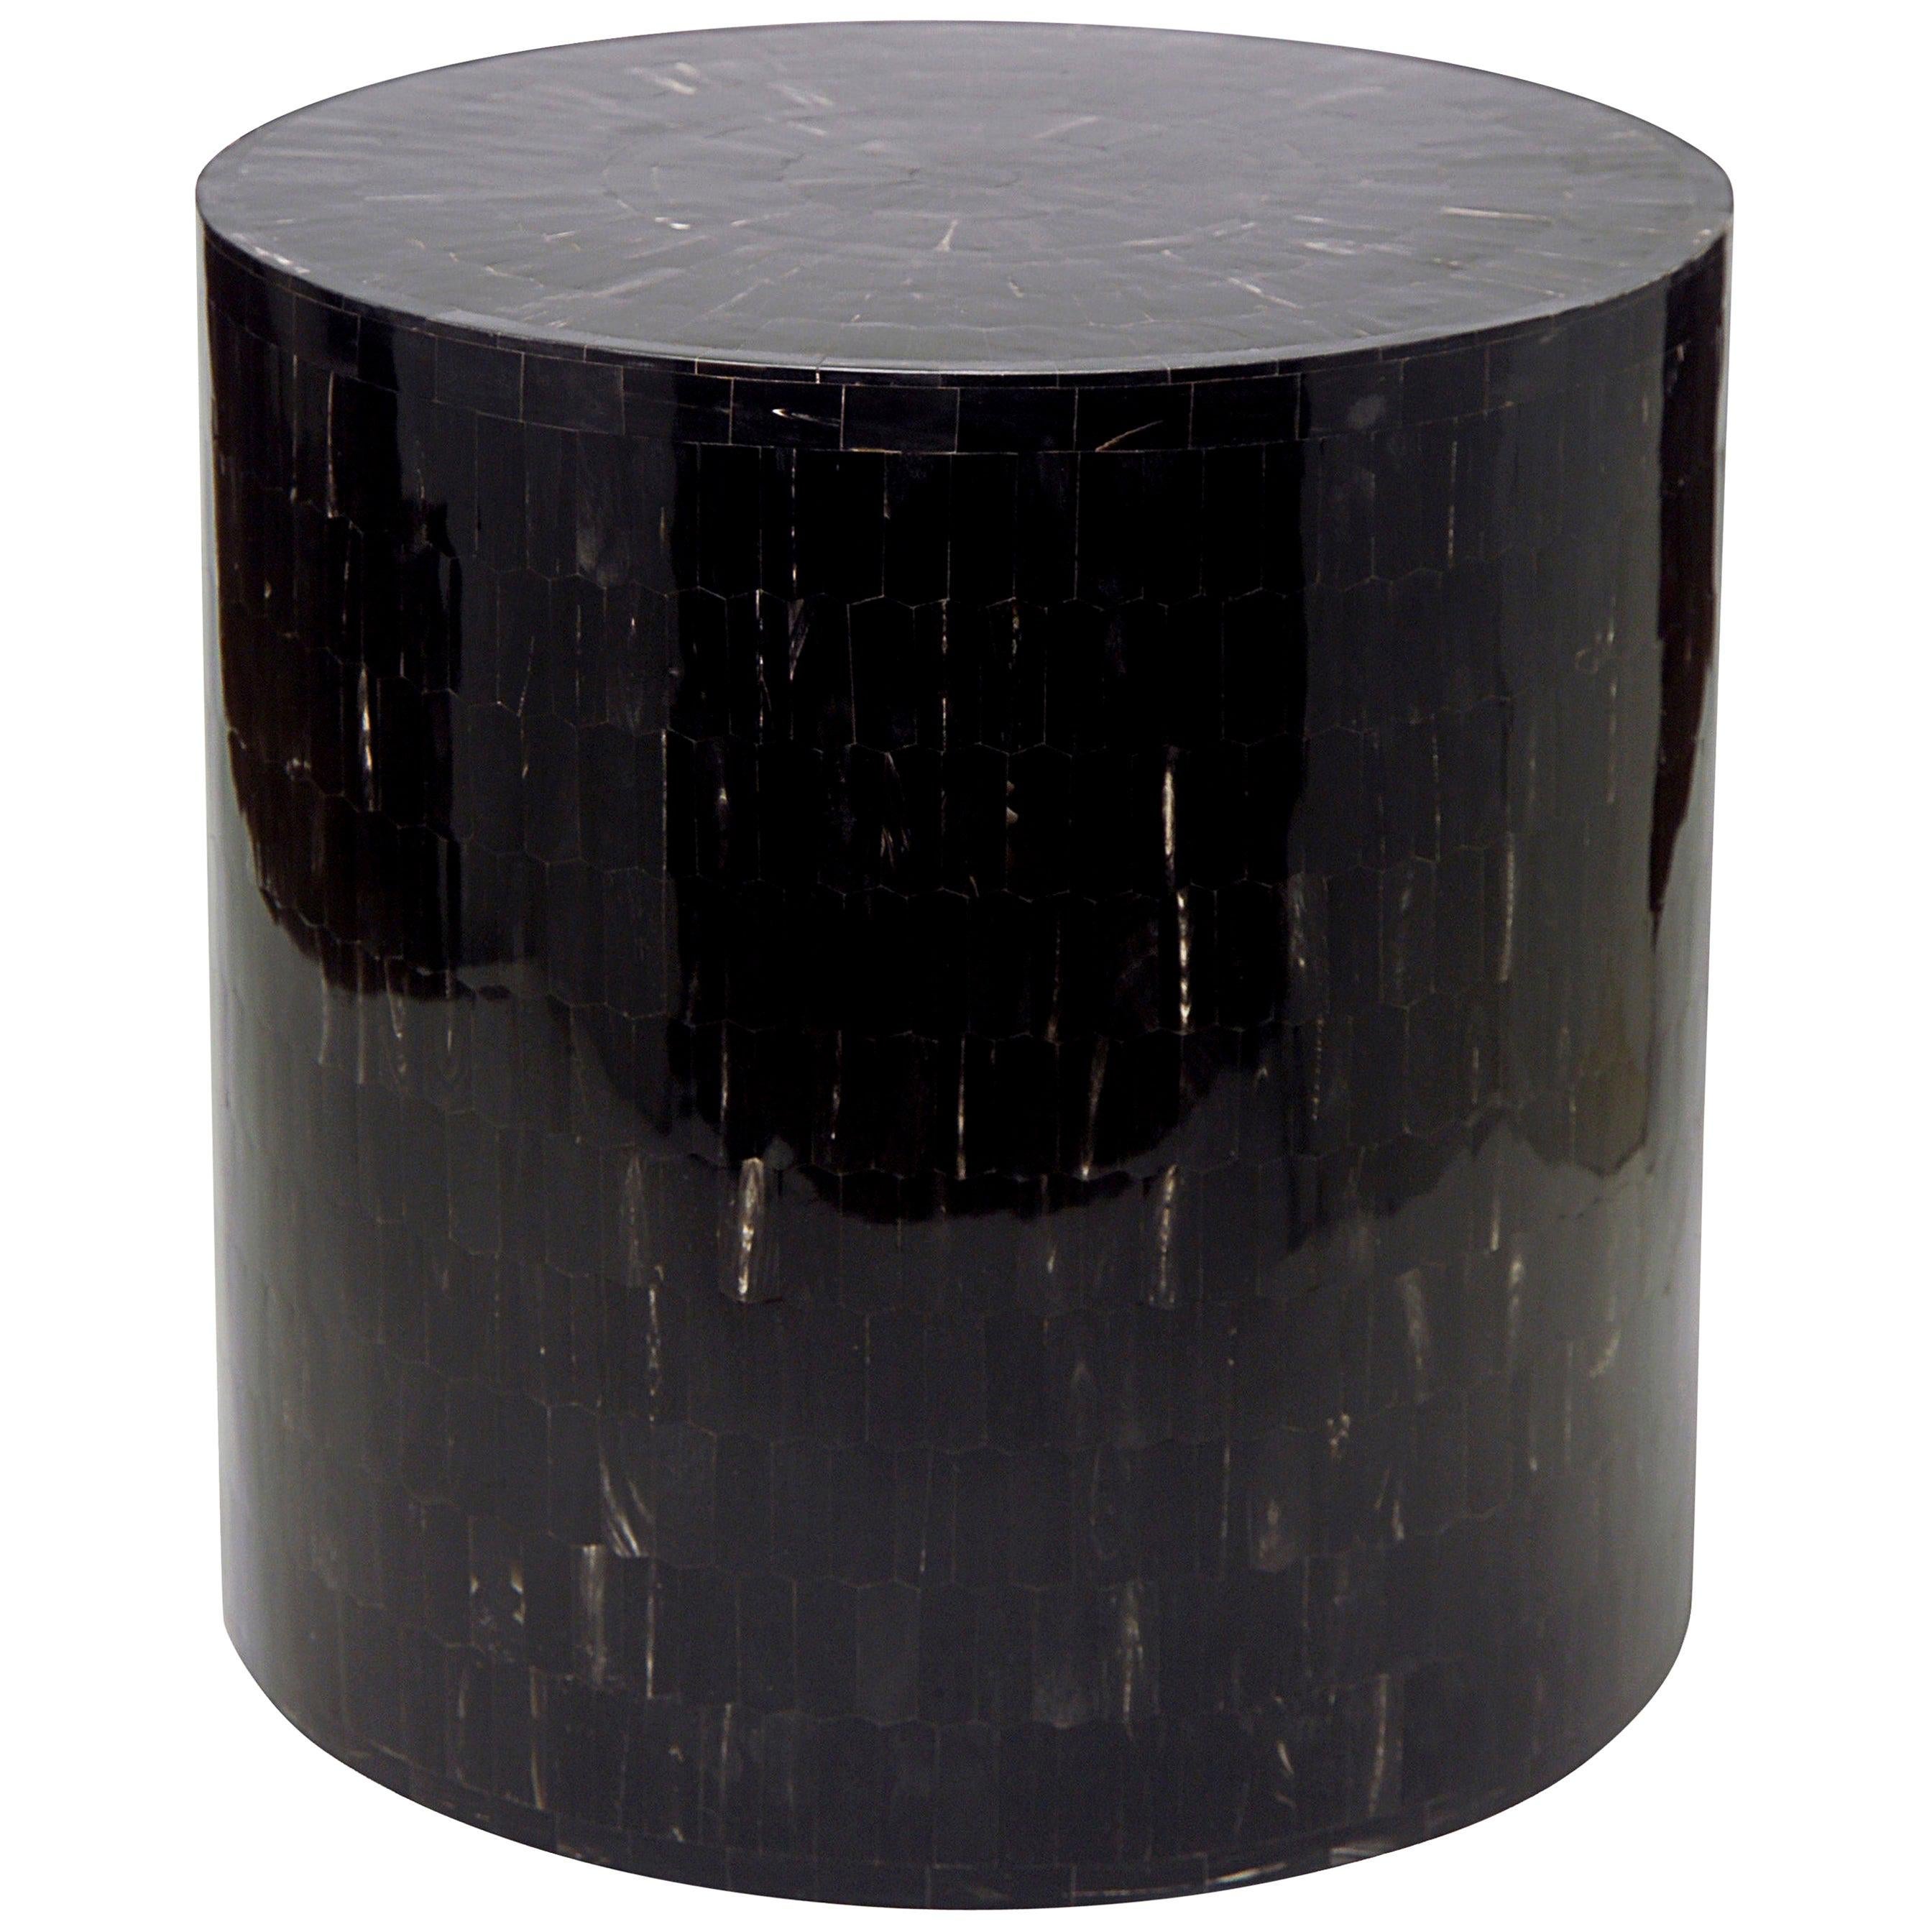 Drum Stool or Table Made with Horn Marquetry, Serenity